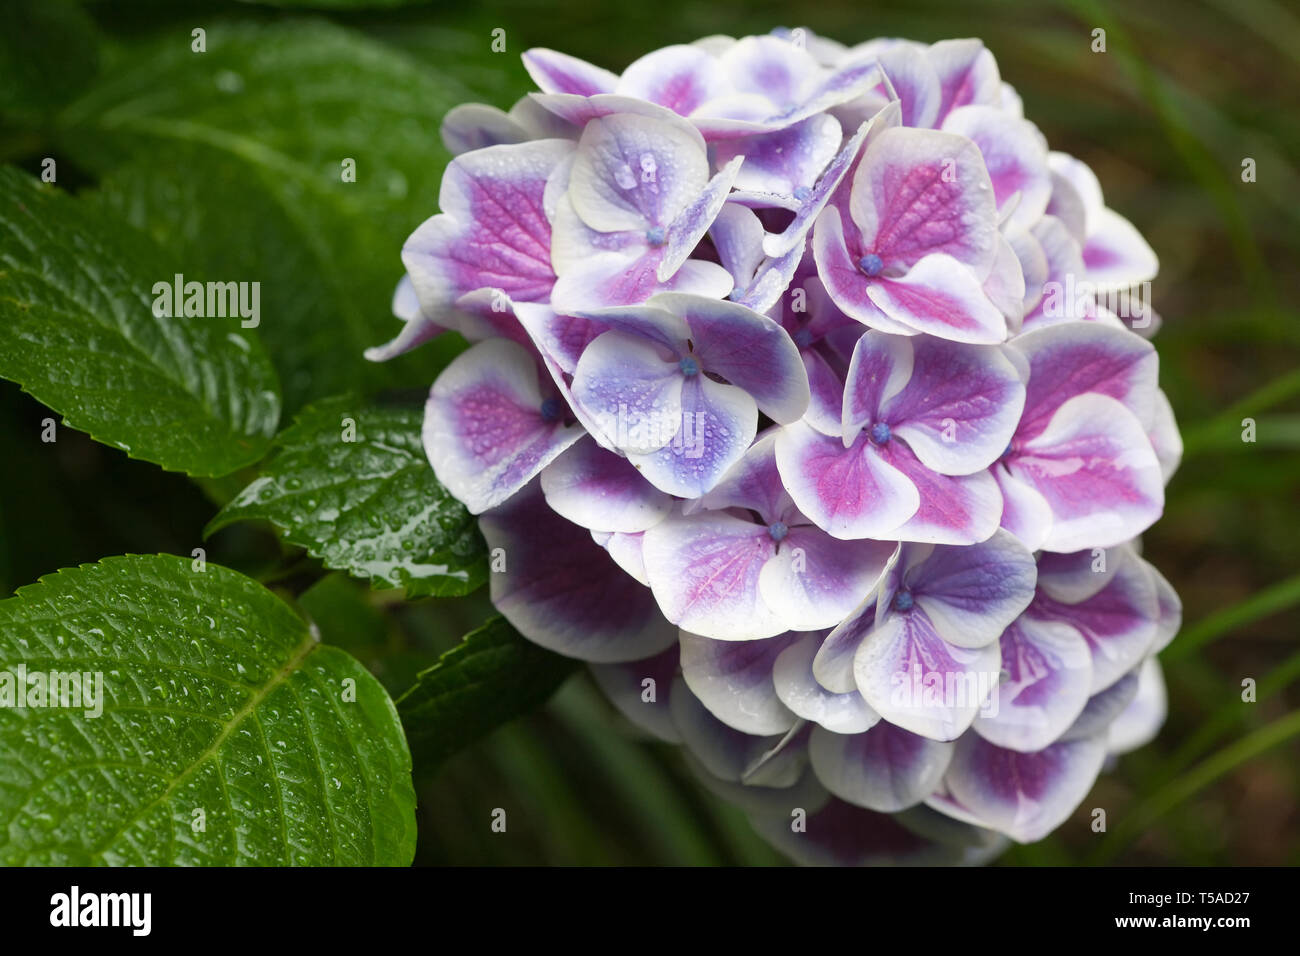 Issaquah, Washington, USA.  Buttons 'N Bows Hydrangea close-up in a shady flower garden. Stock Photo